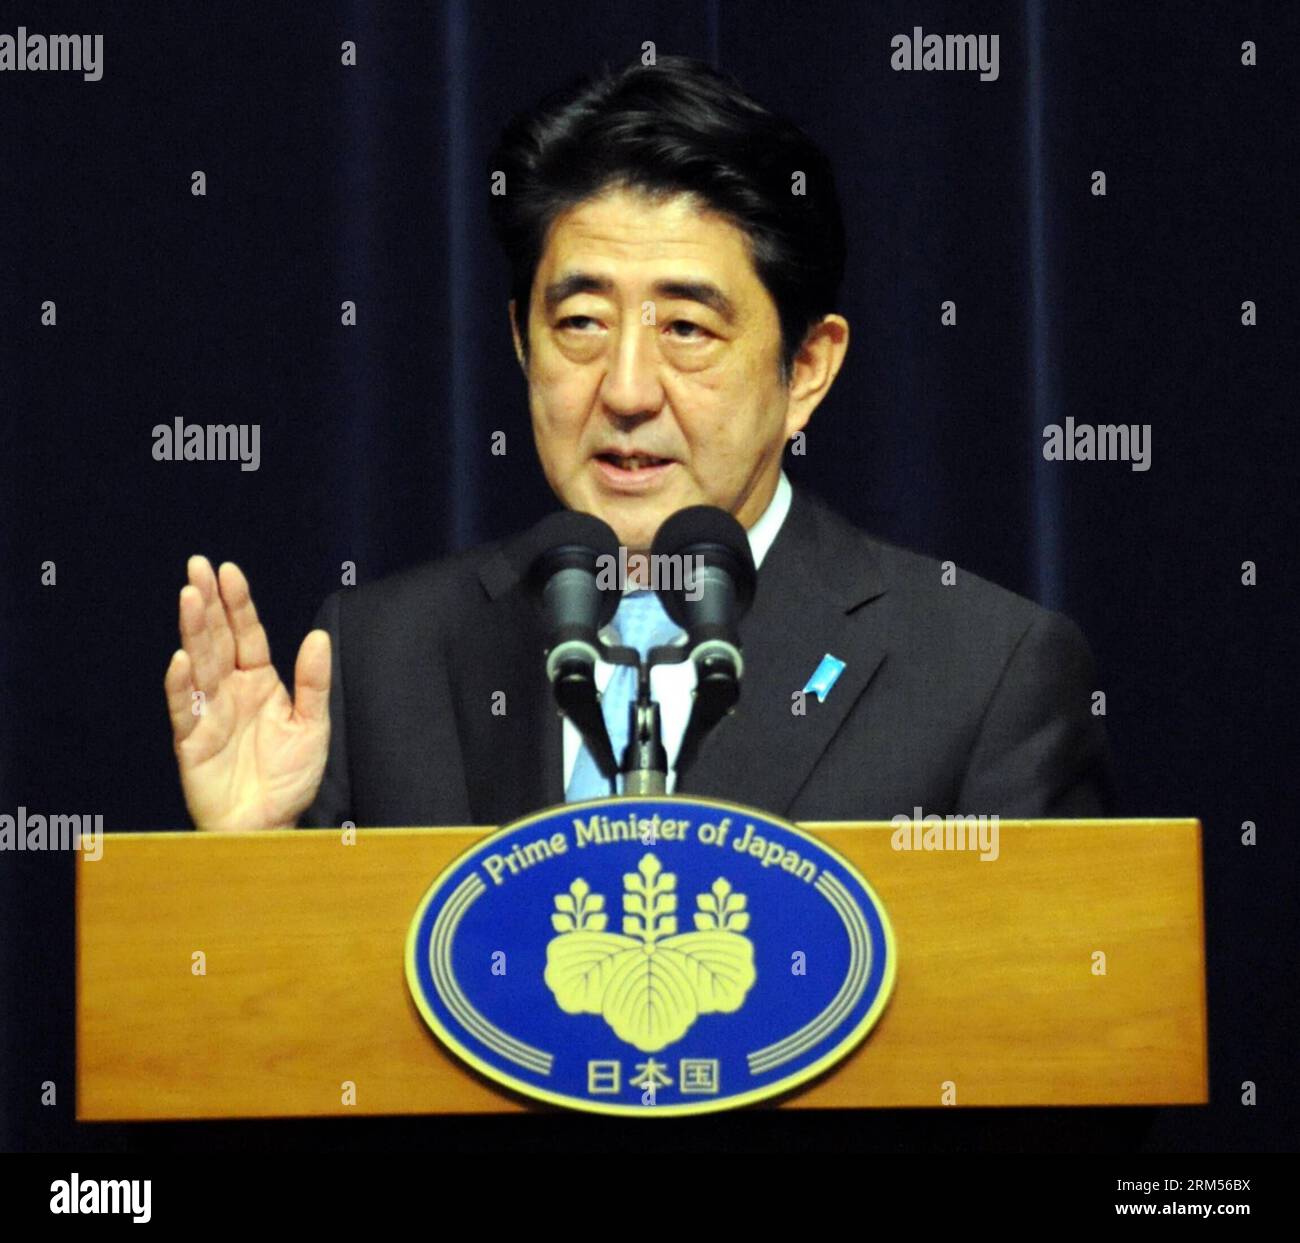 Bildnummer: 60585990  Datum: 10.10.2013  Copyright: imago/Xinhua (131010) -- BANDAR SERI BEGAWAN, Oct. 10, 2013 (Xinhua) -- Japanese Prime Minister Shinzo Abe speaks during a press conference in Bandar Seri Begawan, capital of Brunei, on Oct. 10, 2013. Japanese Prime Minister Shinzo Abe said here Thursday that the U.S.-led Trans-Pacific Partnership (TPP) is a pathway to realize a market befitting the growth center of the 21st century. (Xinhua/Liu Tian) BRUNEI-BANDAR SERI BEGAWAN-SHINZO ABE-PRESS CONFERENCE PUBLICATIONxNOTxINxCHN People Politik xcb x0x 2013 quadrat      60585990 Date 10 10 2013 Stock Photo